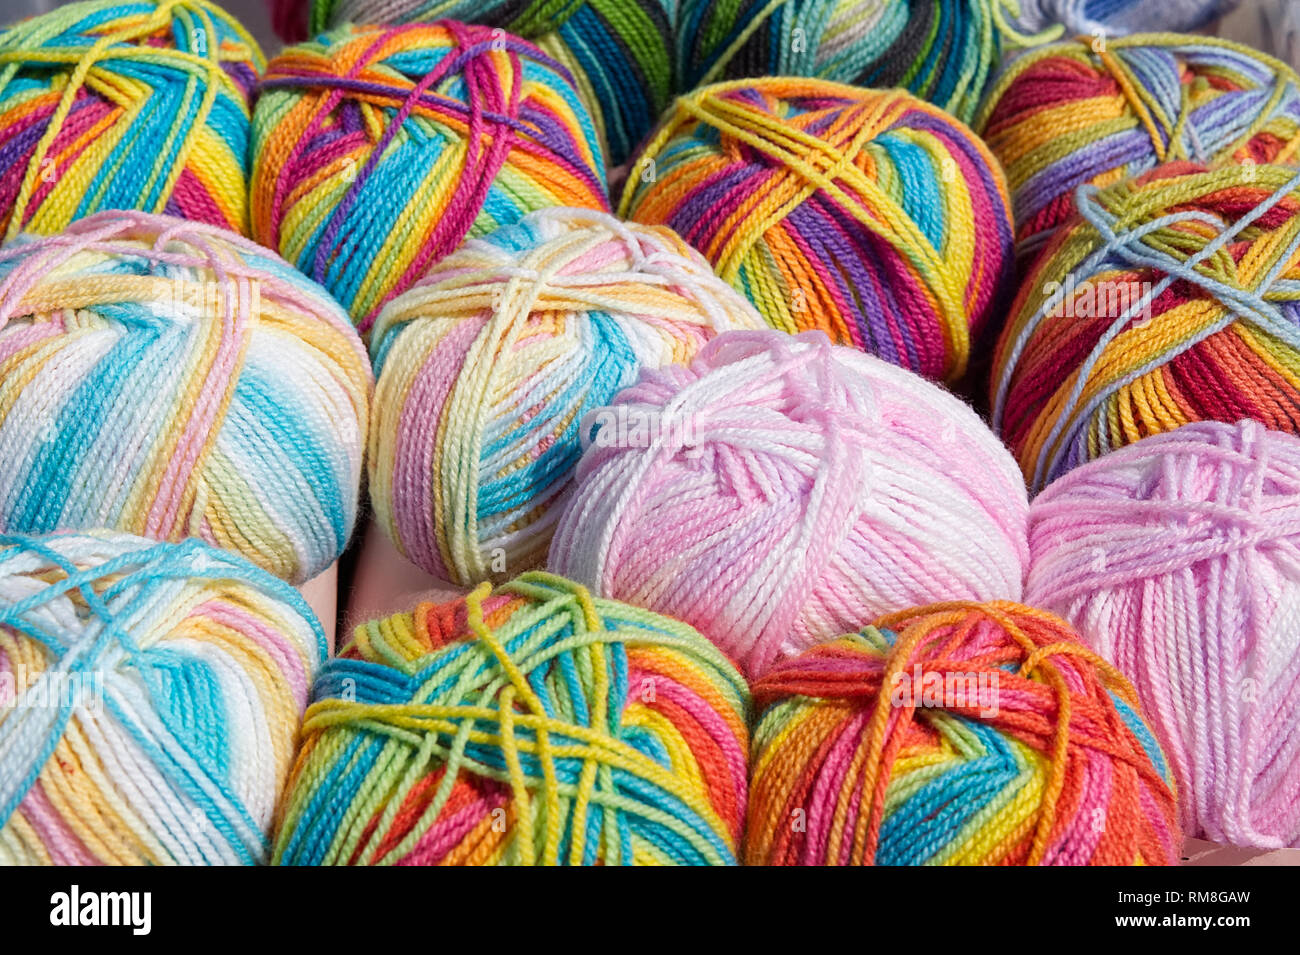 Balls of rainbow coloured and pink wools Stock Photo